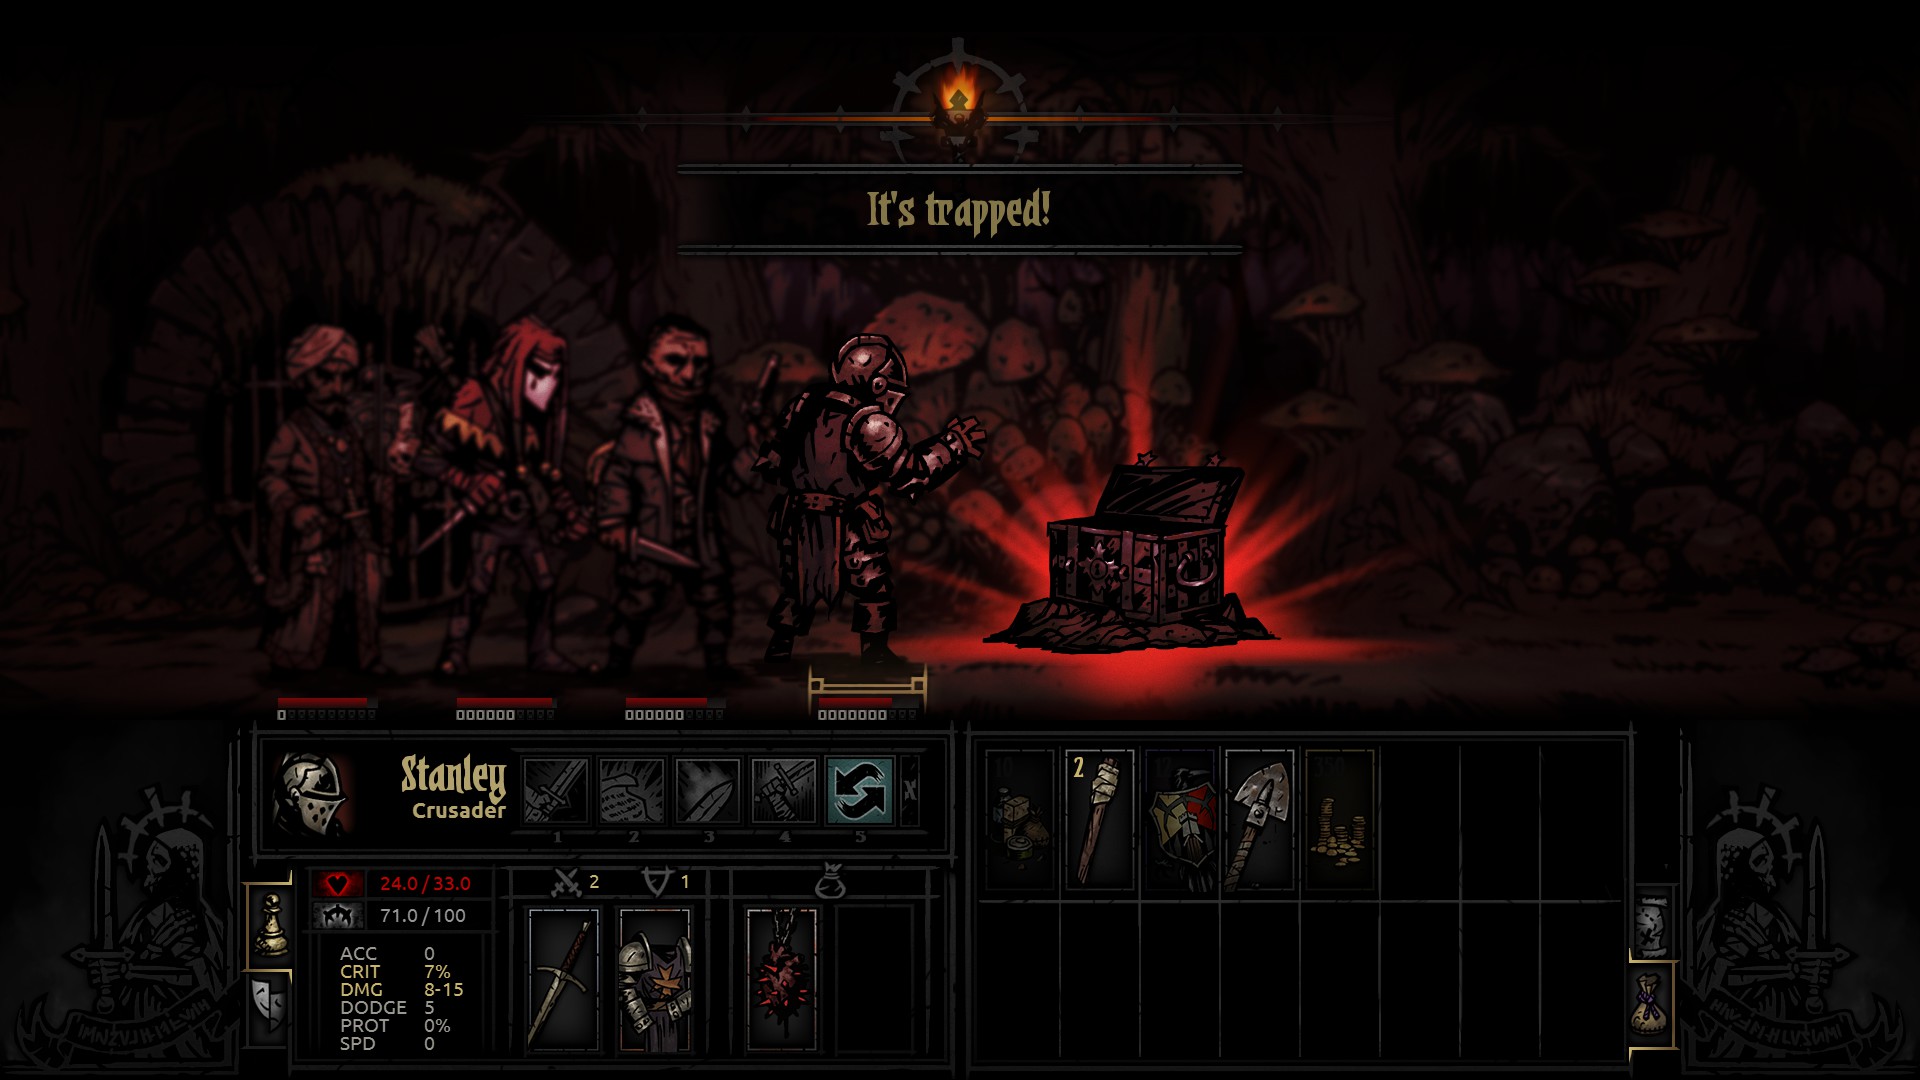 Darkest Dungeon Early Access Impressions | PC Invasion
